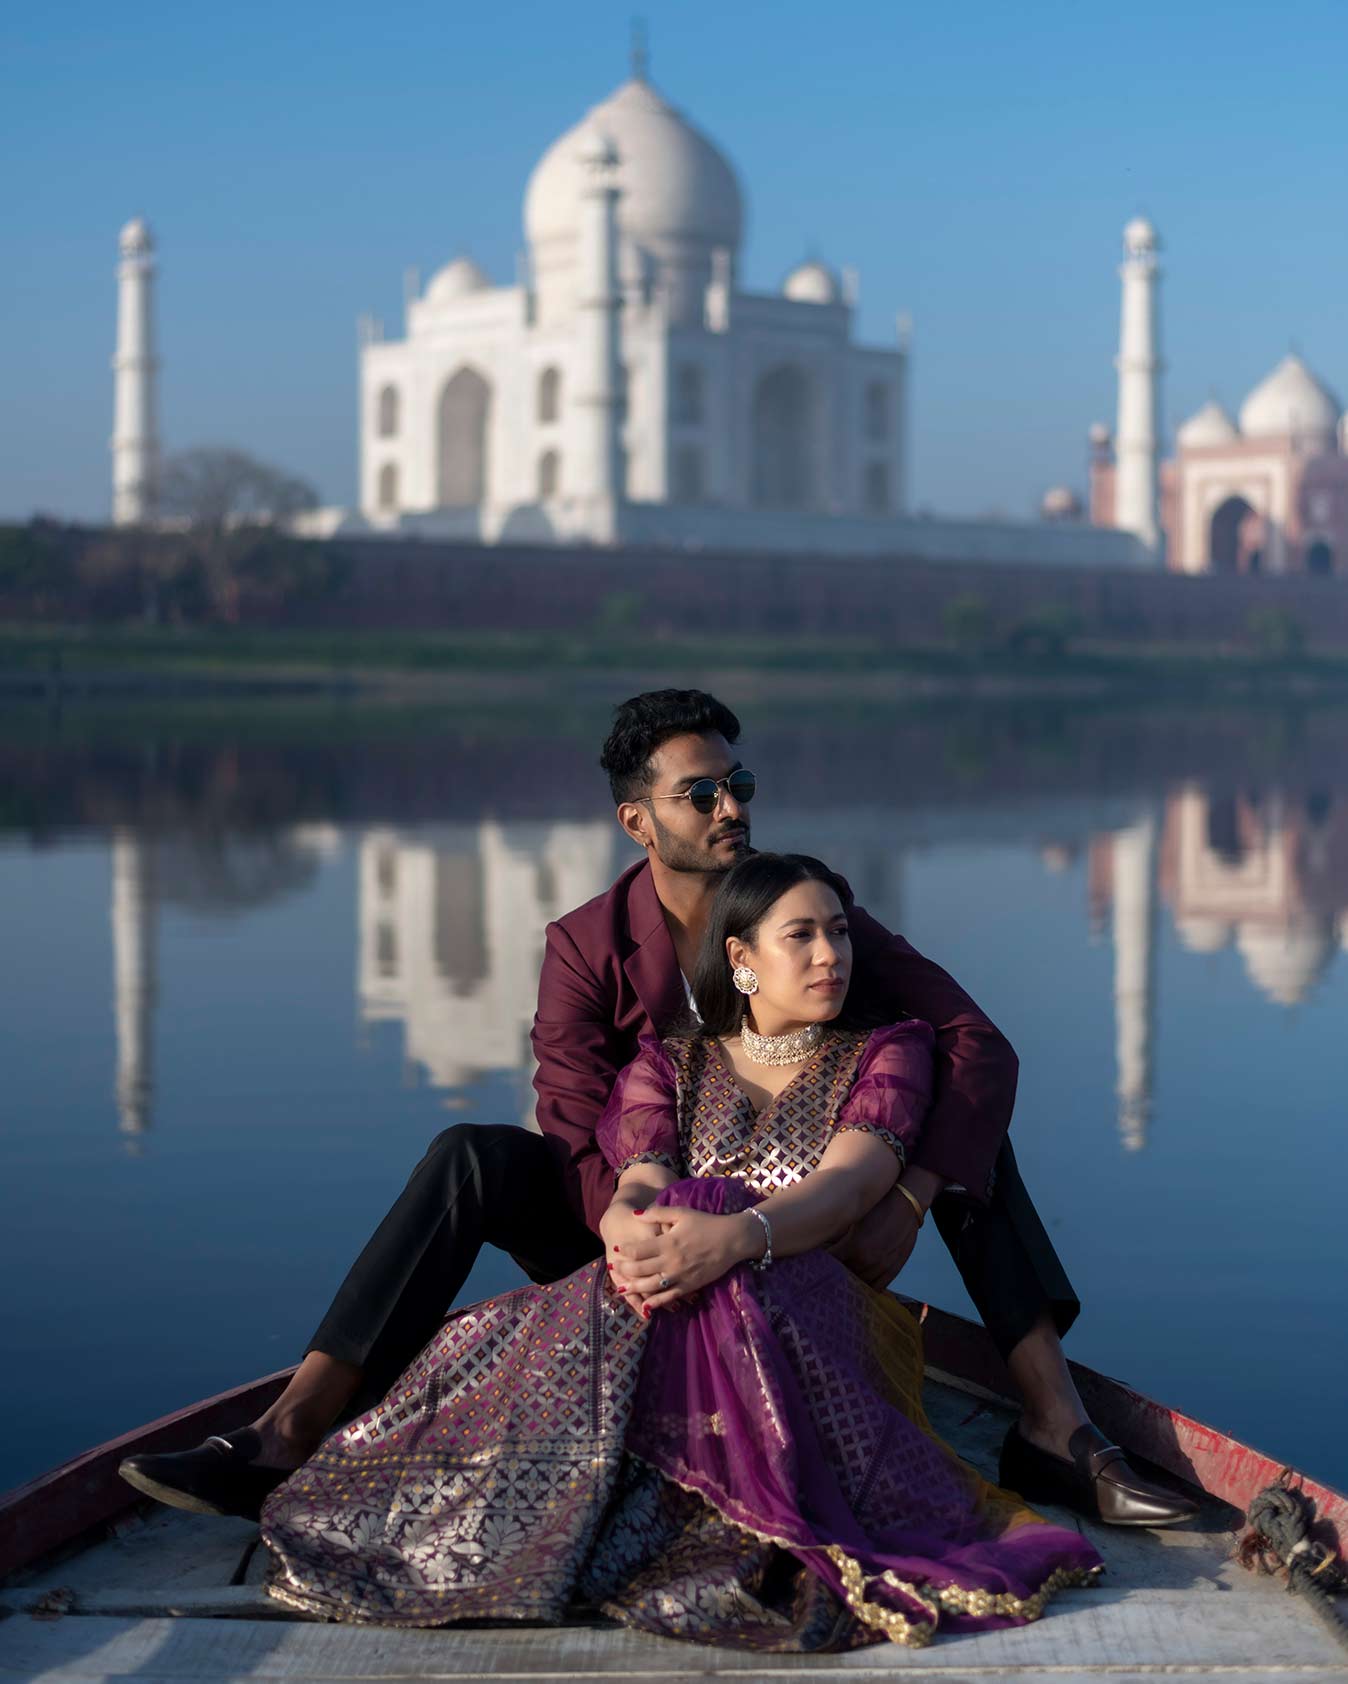 Taj Mahal Photography Guide for Beginners: 5 tips for taking the best  pictures - The Travel Intern